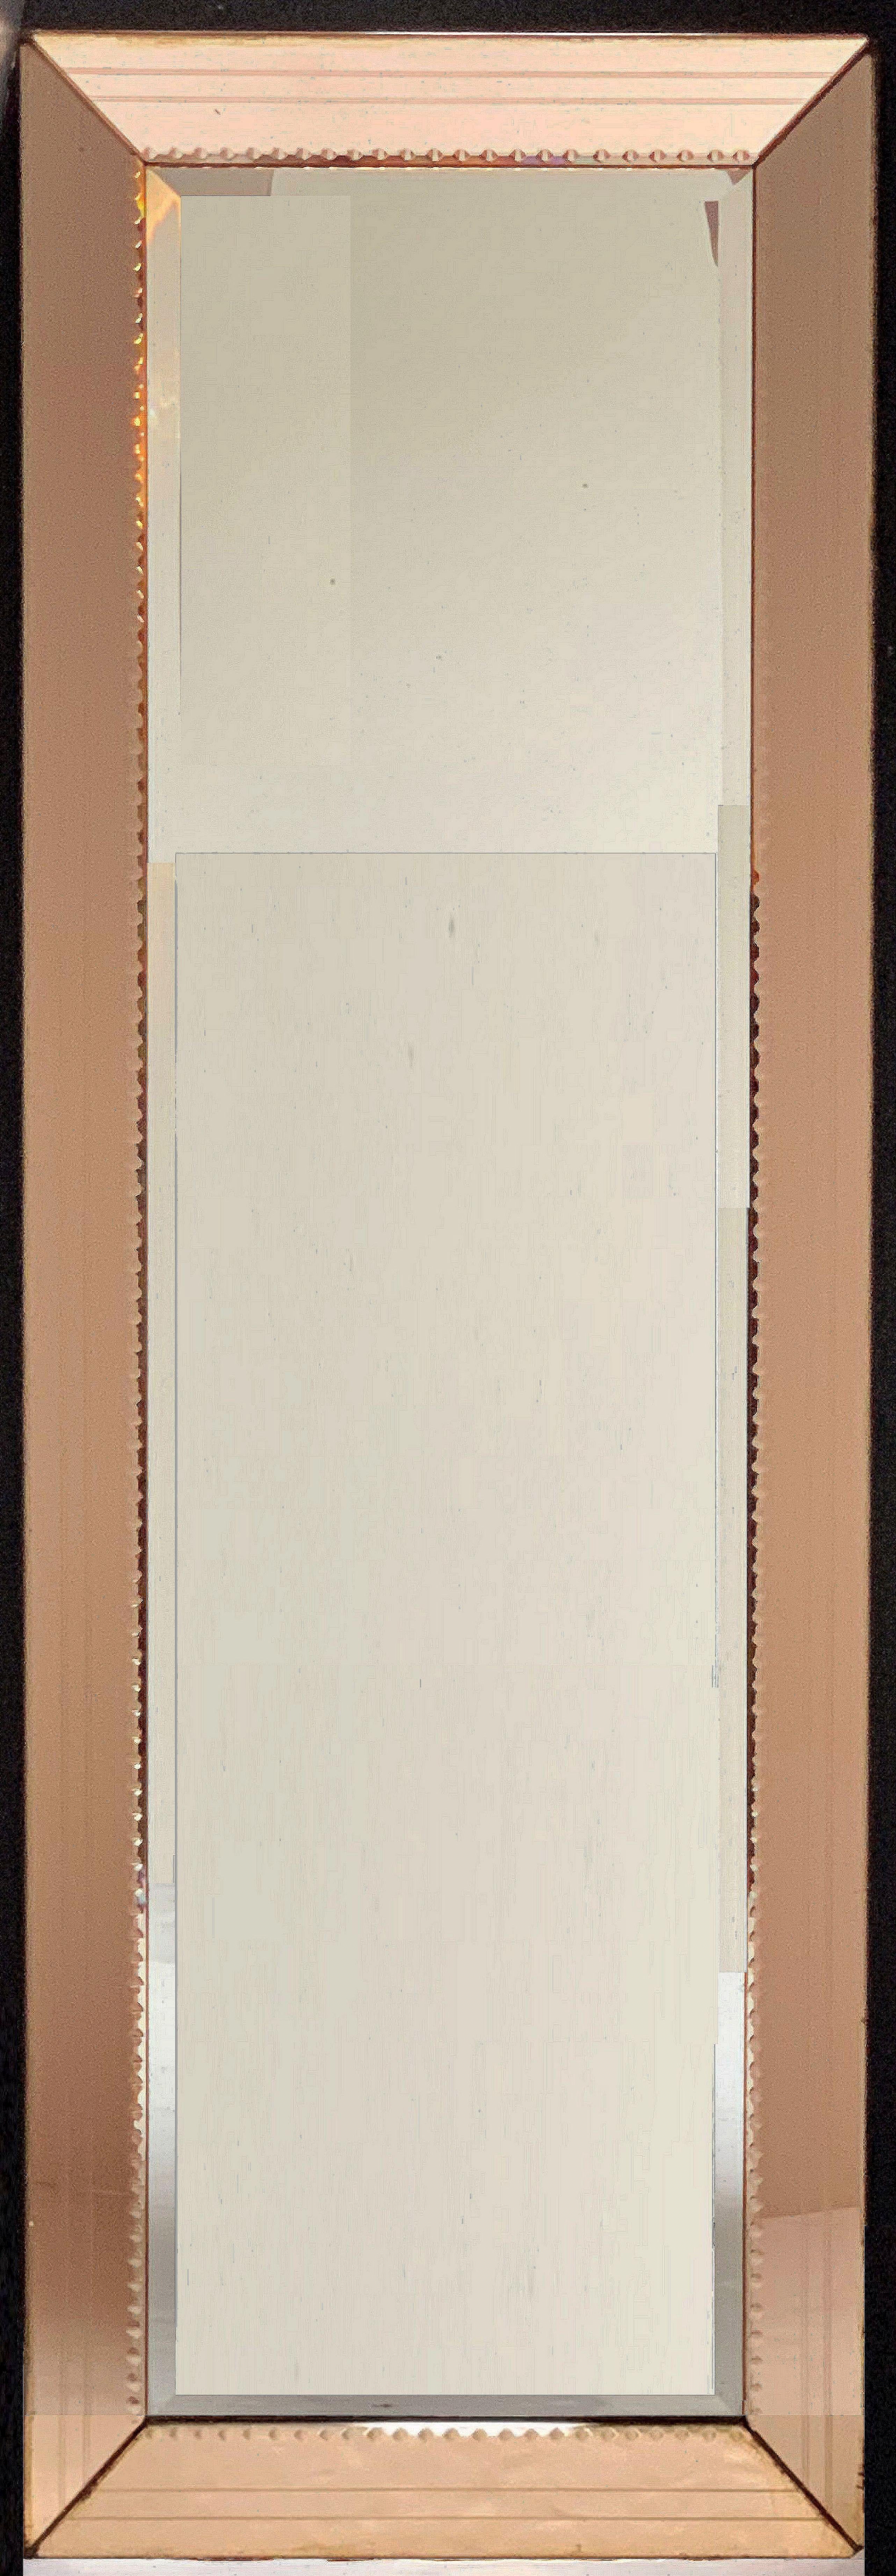 Art Deco Mirror with Beveled Frame of Copper-Colored Glass (H 58 3/4 x W 19 3/4) 14